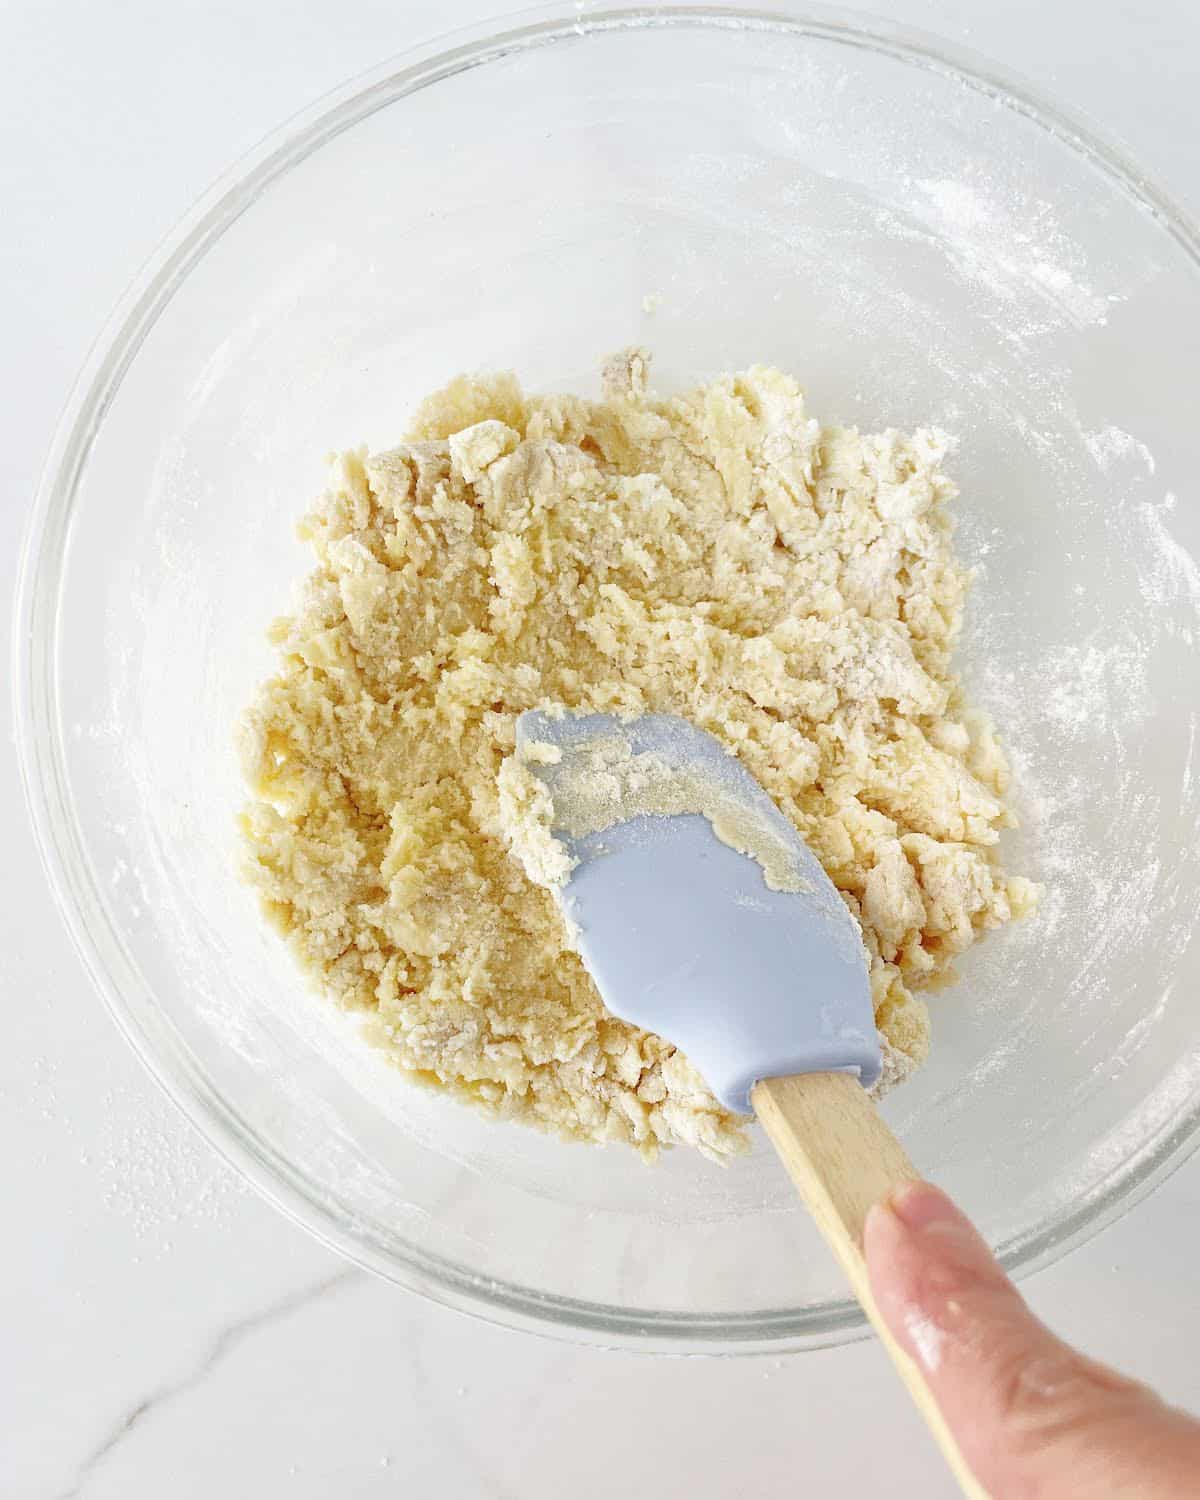 Mixing cookie dough with a light blue spatula in a glass bowl on a white marble surface.